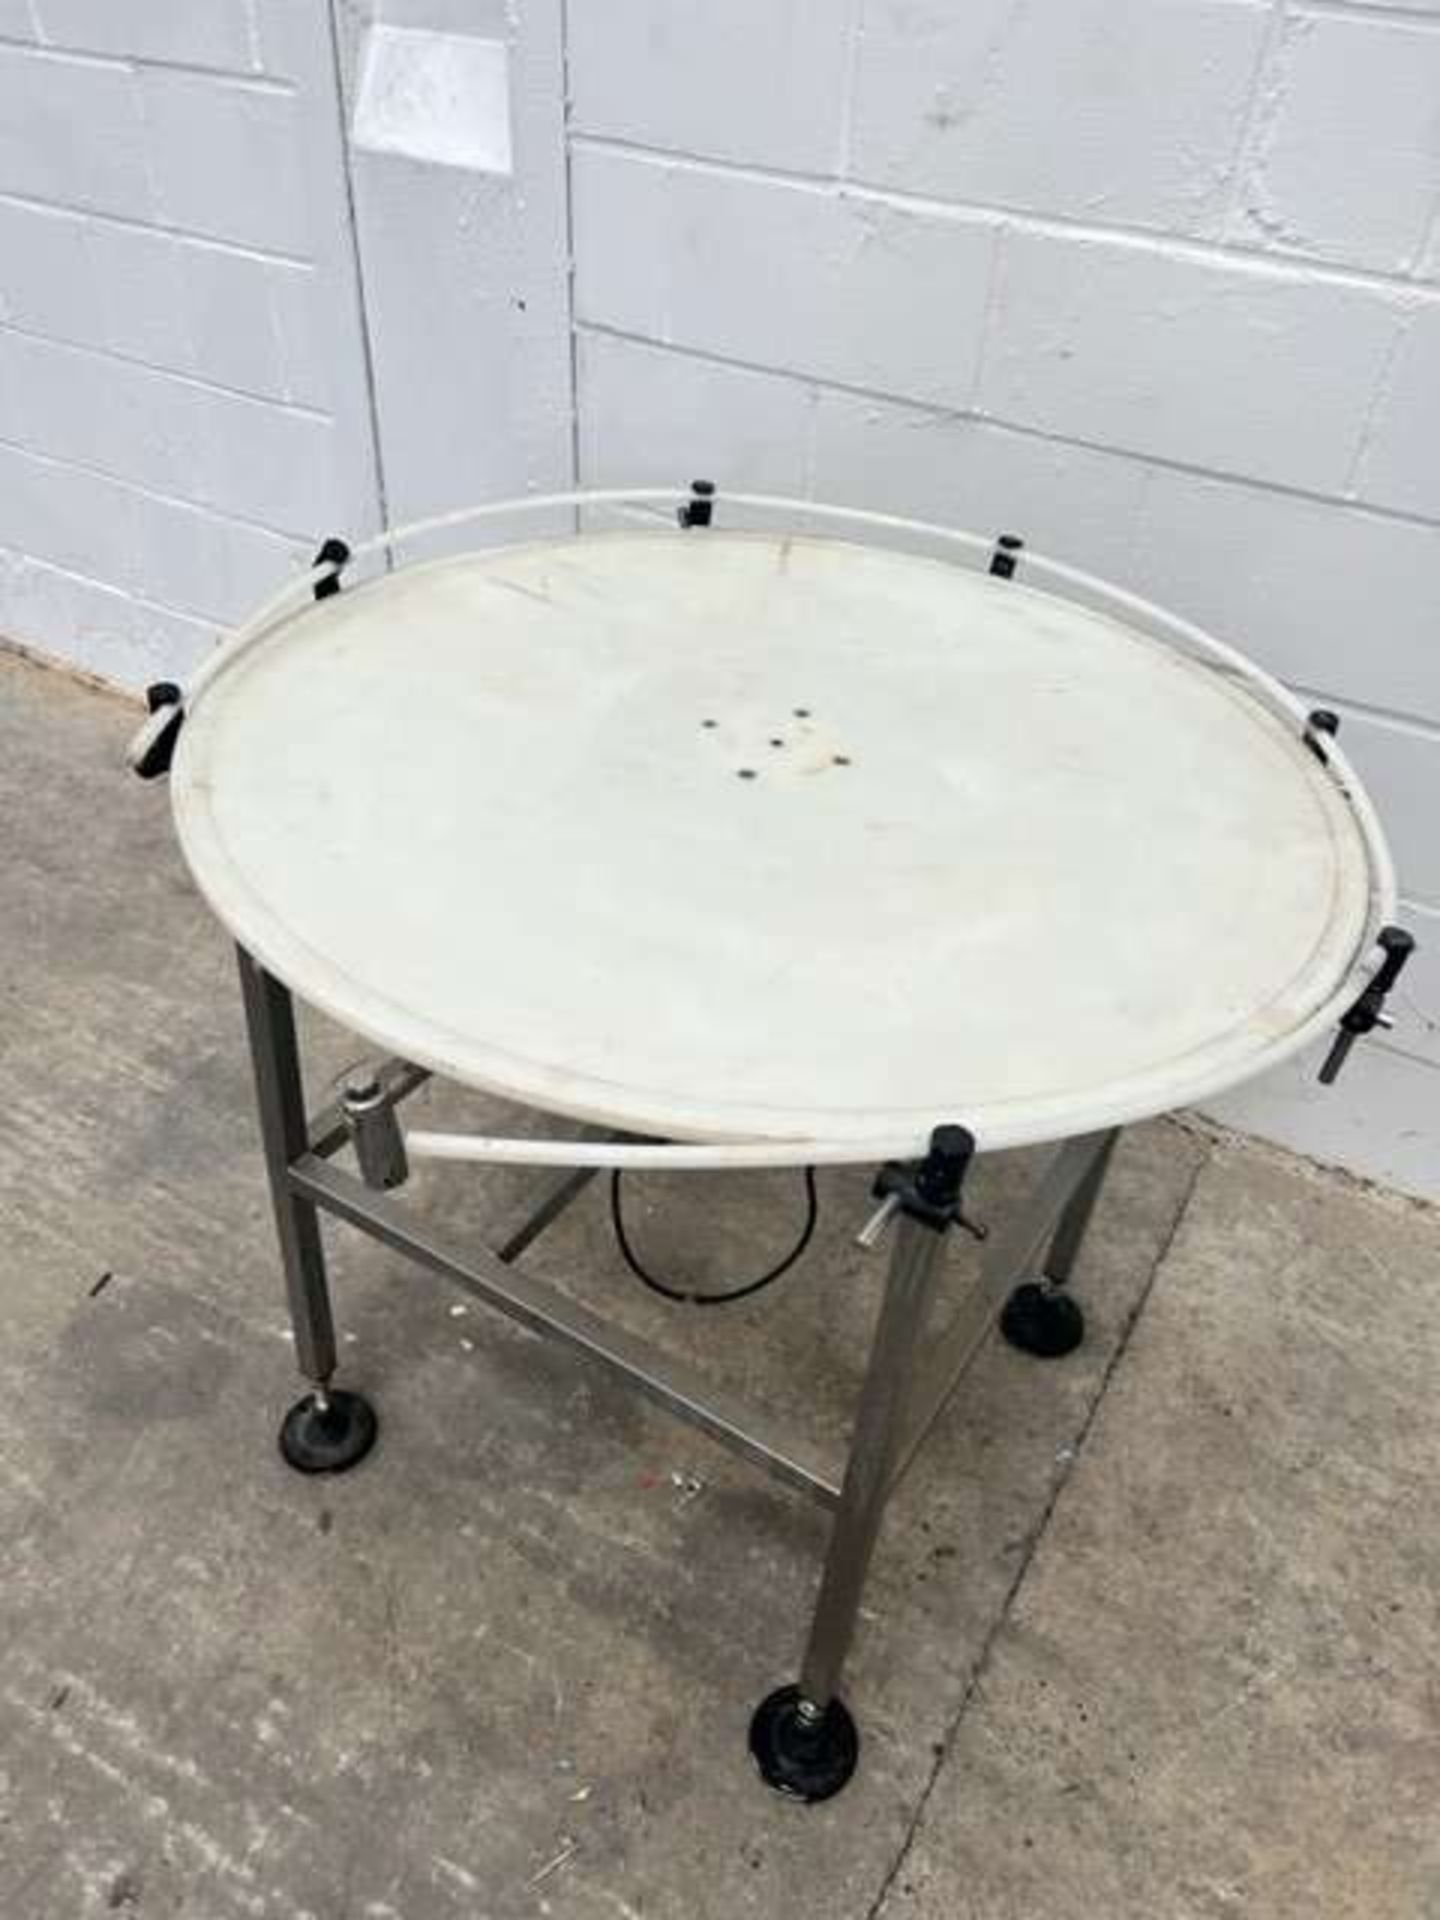 Rotary Table 1000mm DIA with Plastic Top - Image 4 of 7